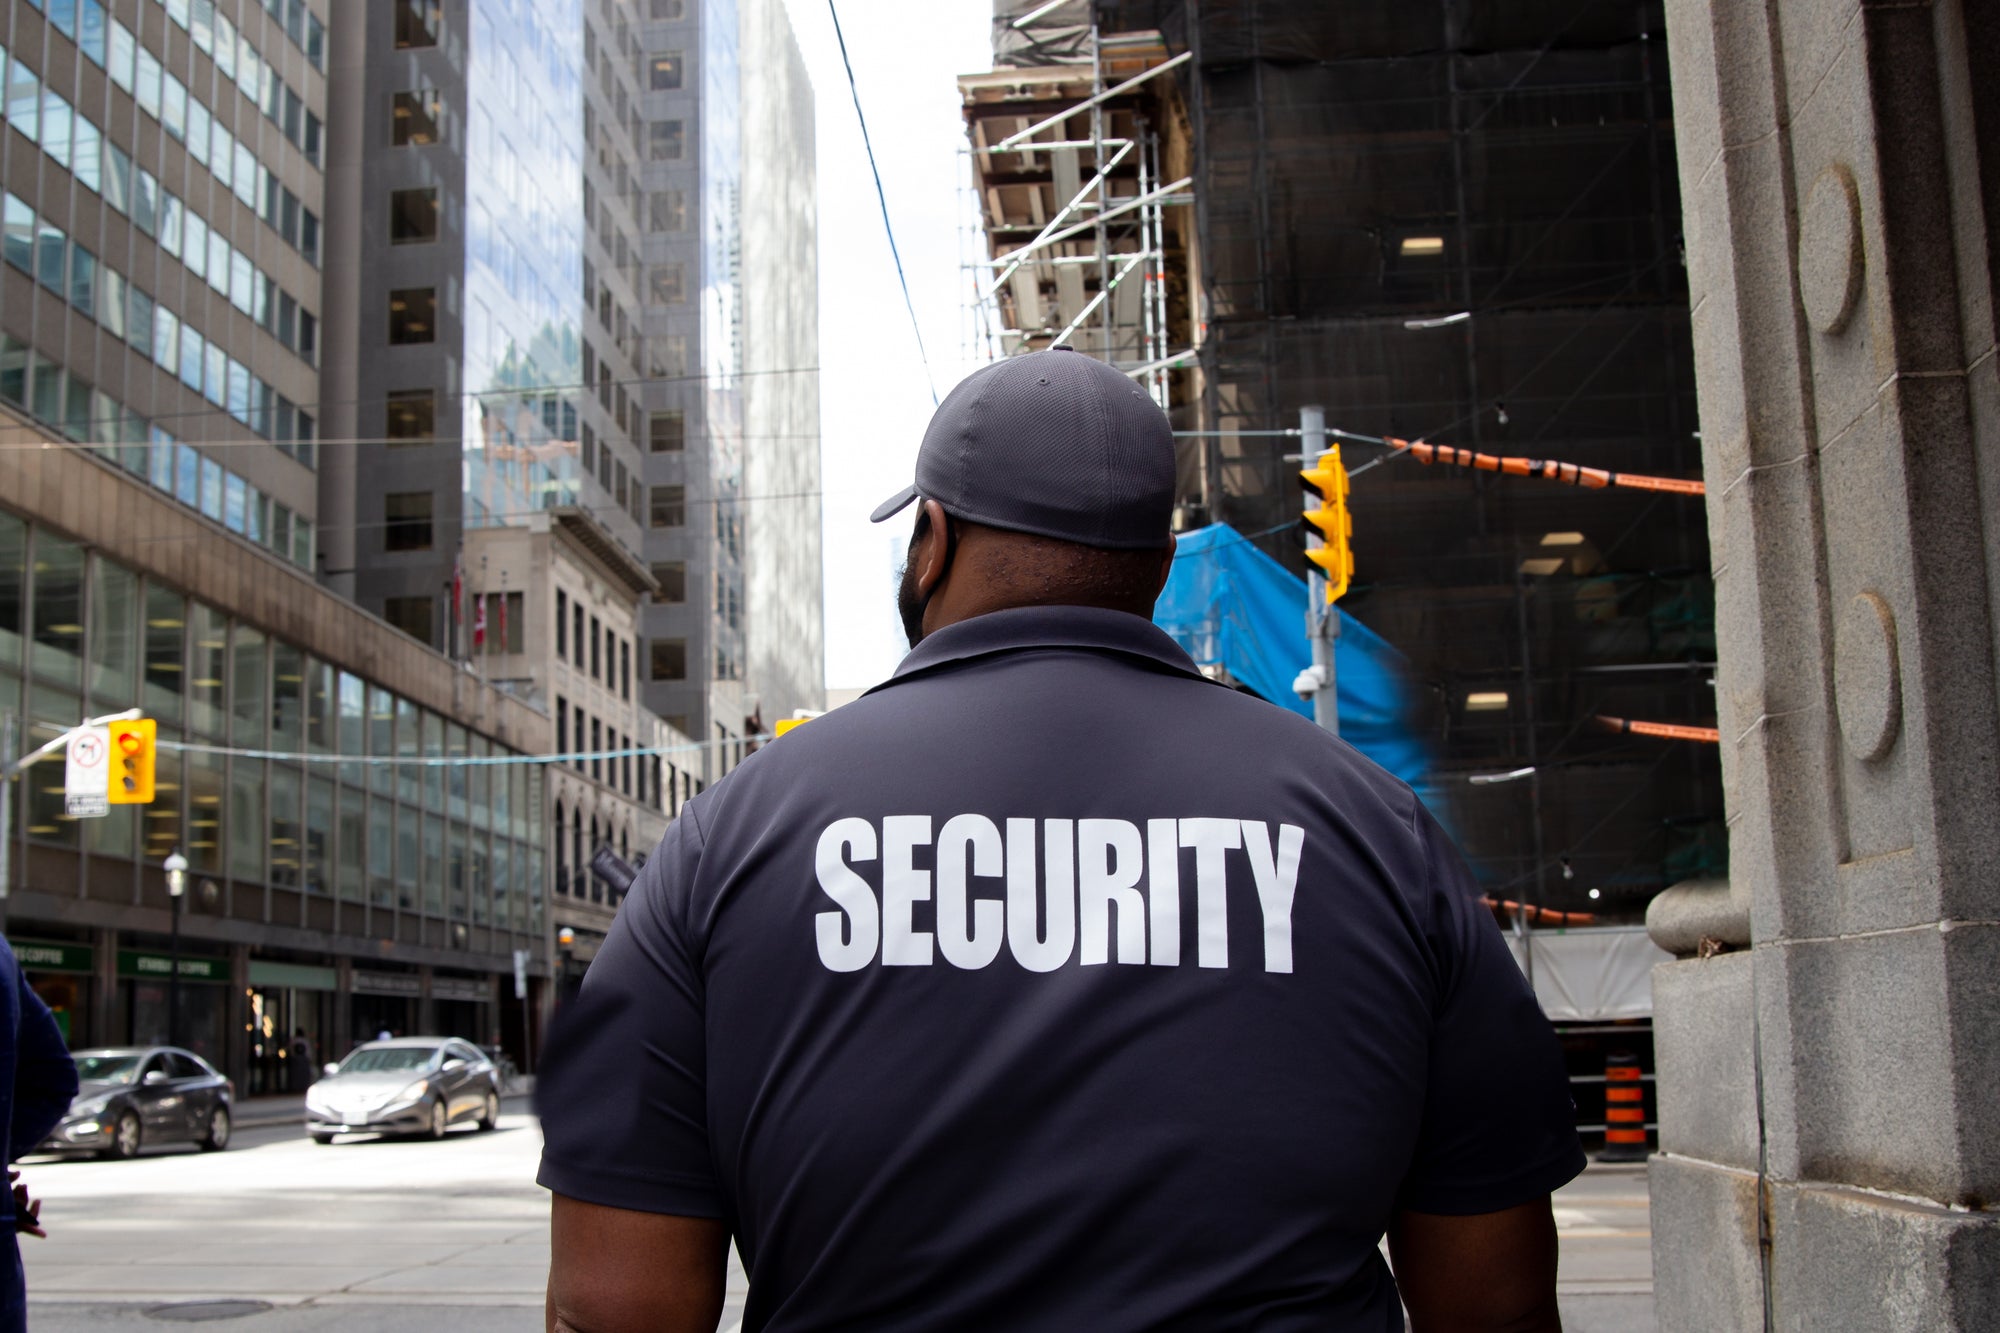 Security guard walking down the street of a city wearing a navy shirt that says Security in big block letters on the back